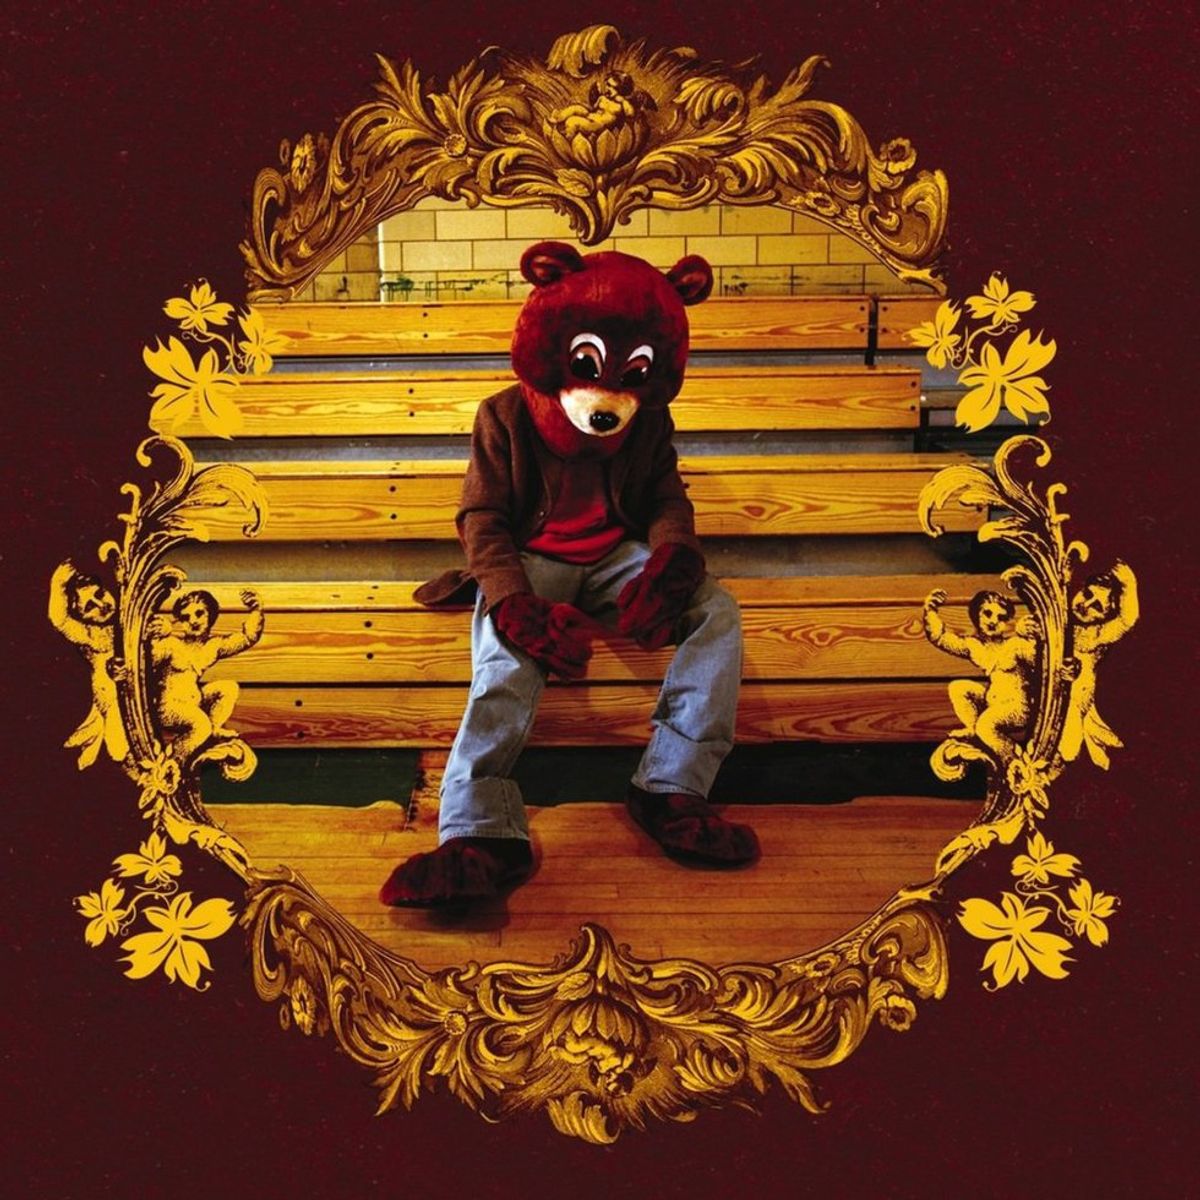 Why "The College Dropout" Is The Perfect Album